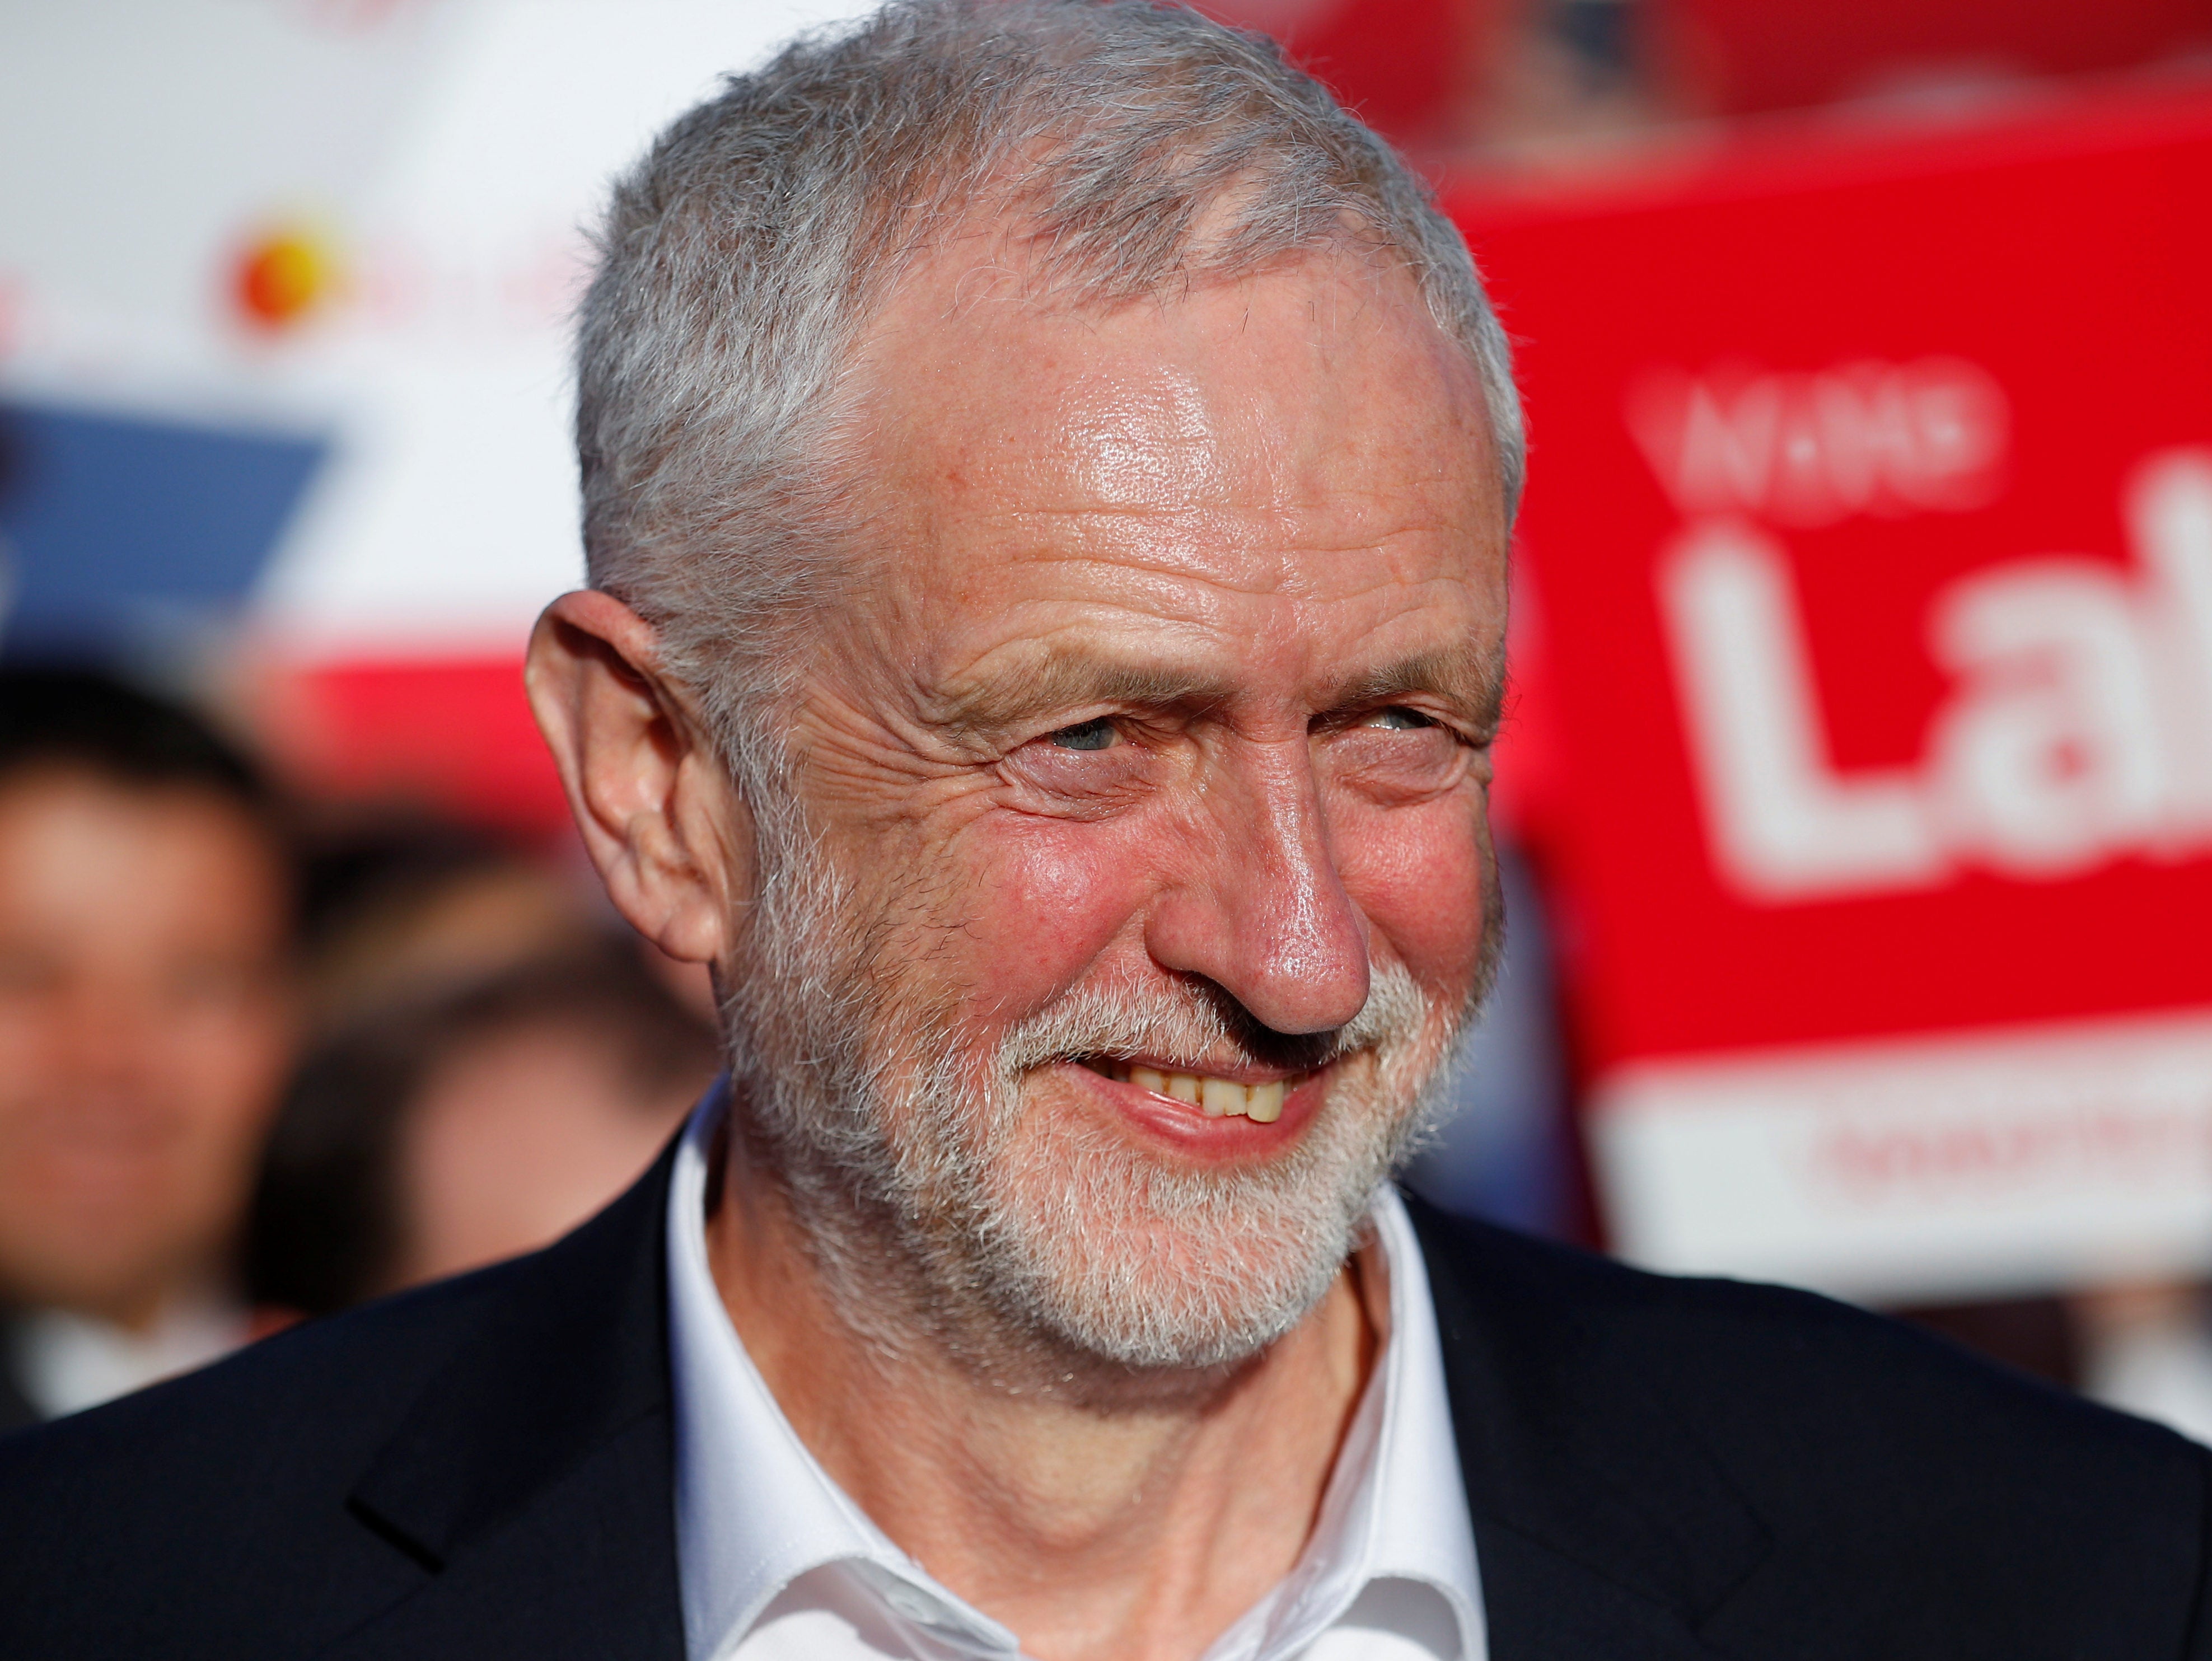 Labour manifesto pledges Leveson Two, 'national review' into local press and support for BBC